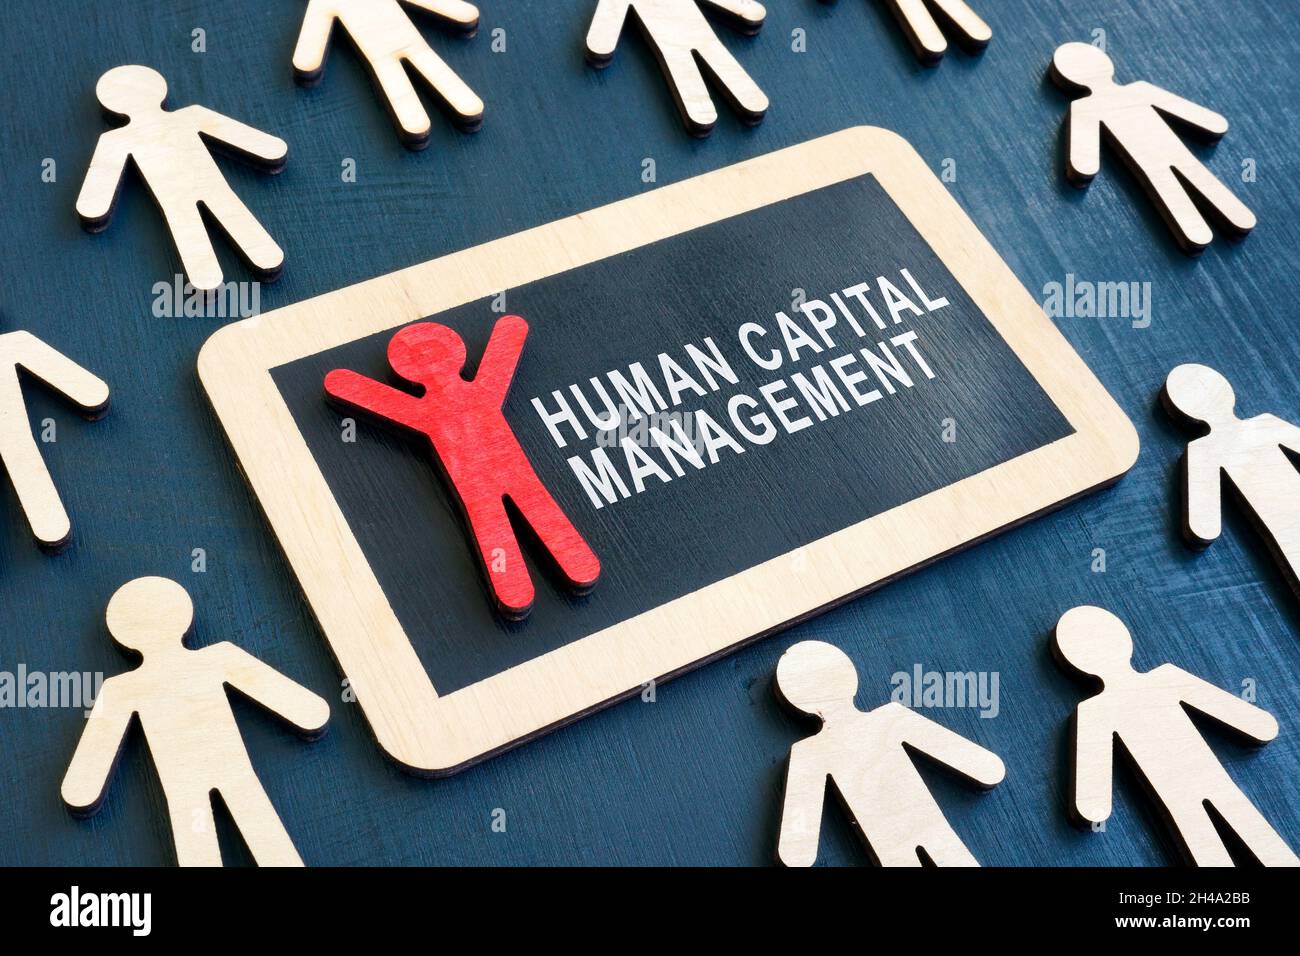 Plate with words Human capital management and red figurine. Stock Photo